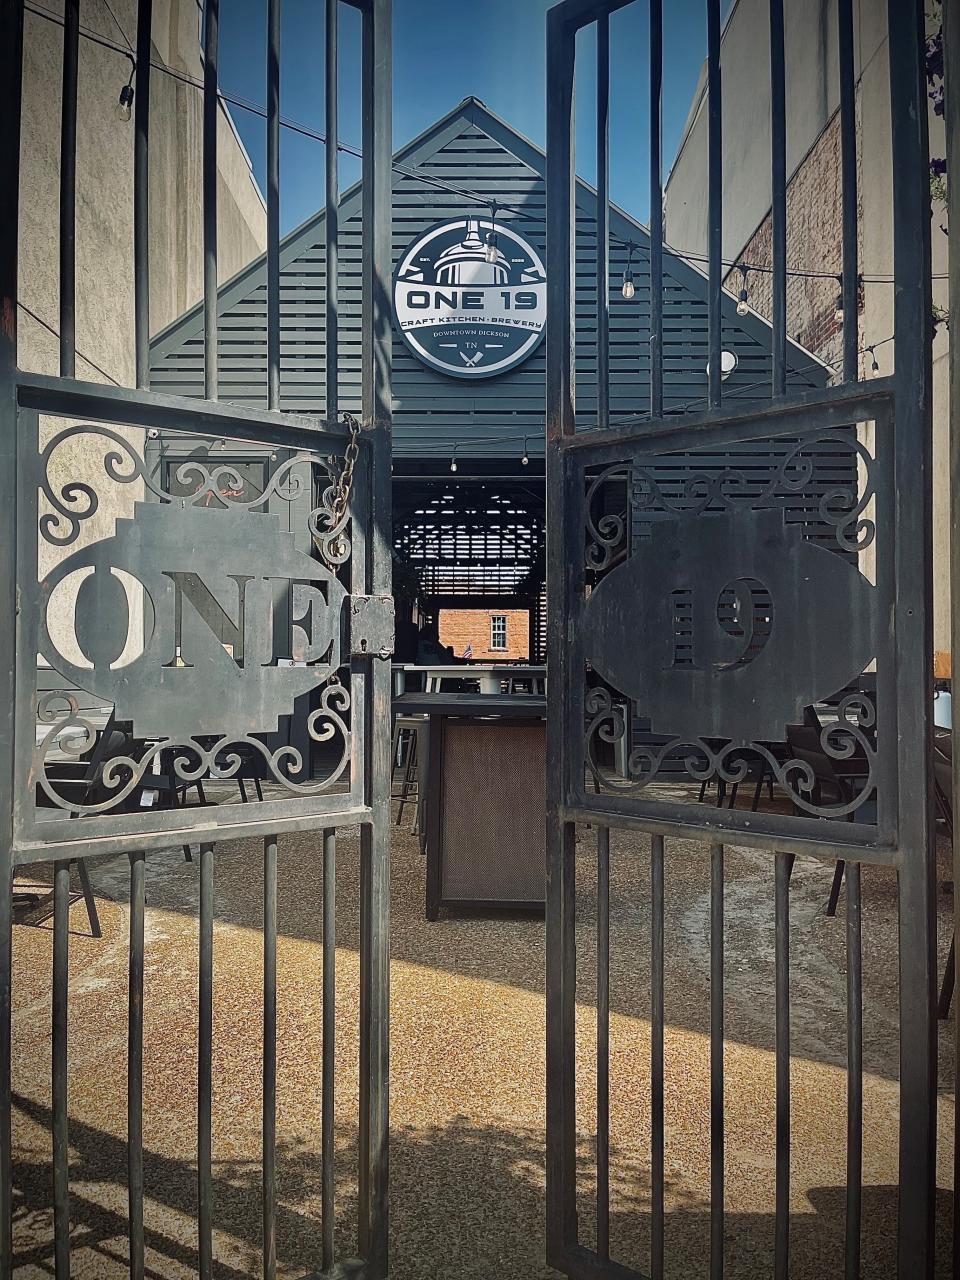 The entrance to One19 Craft Kitchen & Brewery on Main Street in Downtown Dickson.